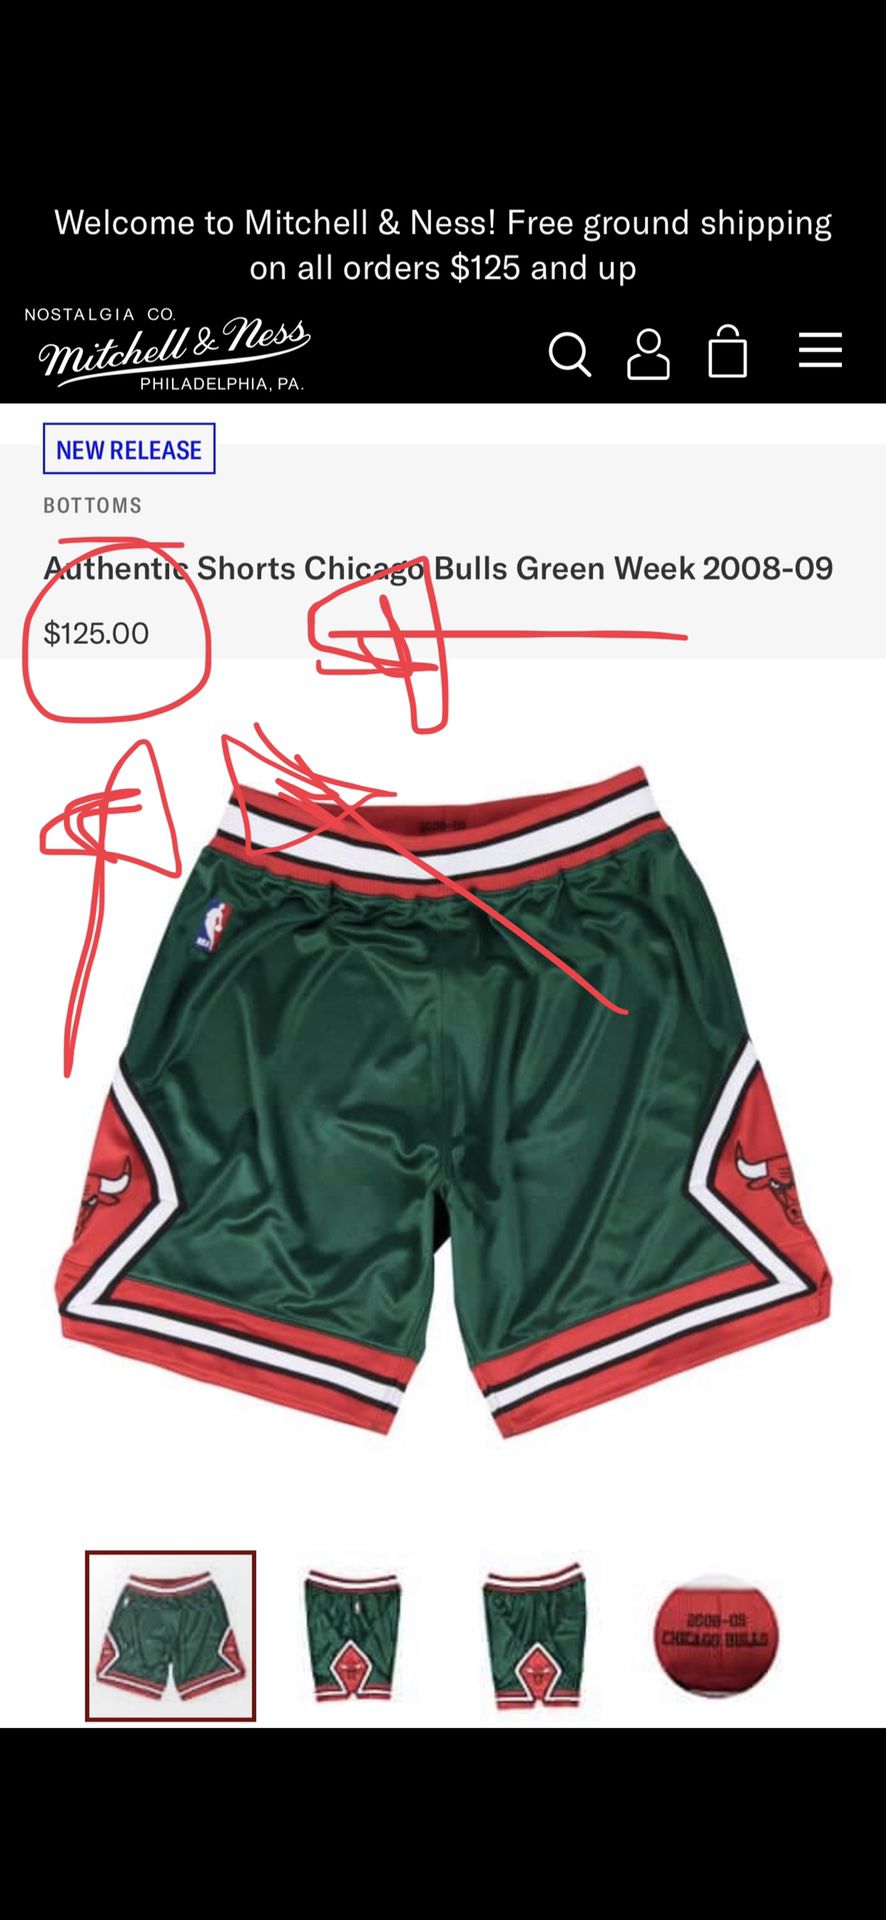 Mitchell & Ness NBA Authentic Shorts Chicago Bulls 2008-09 Green - KYGN